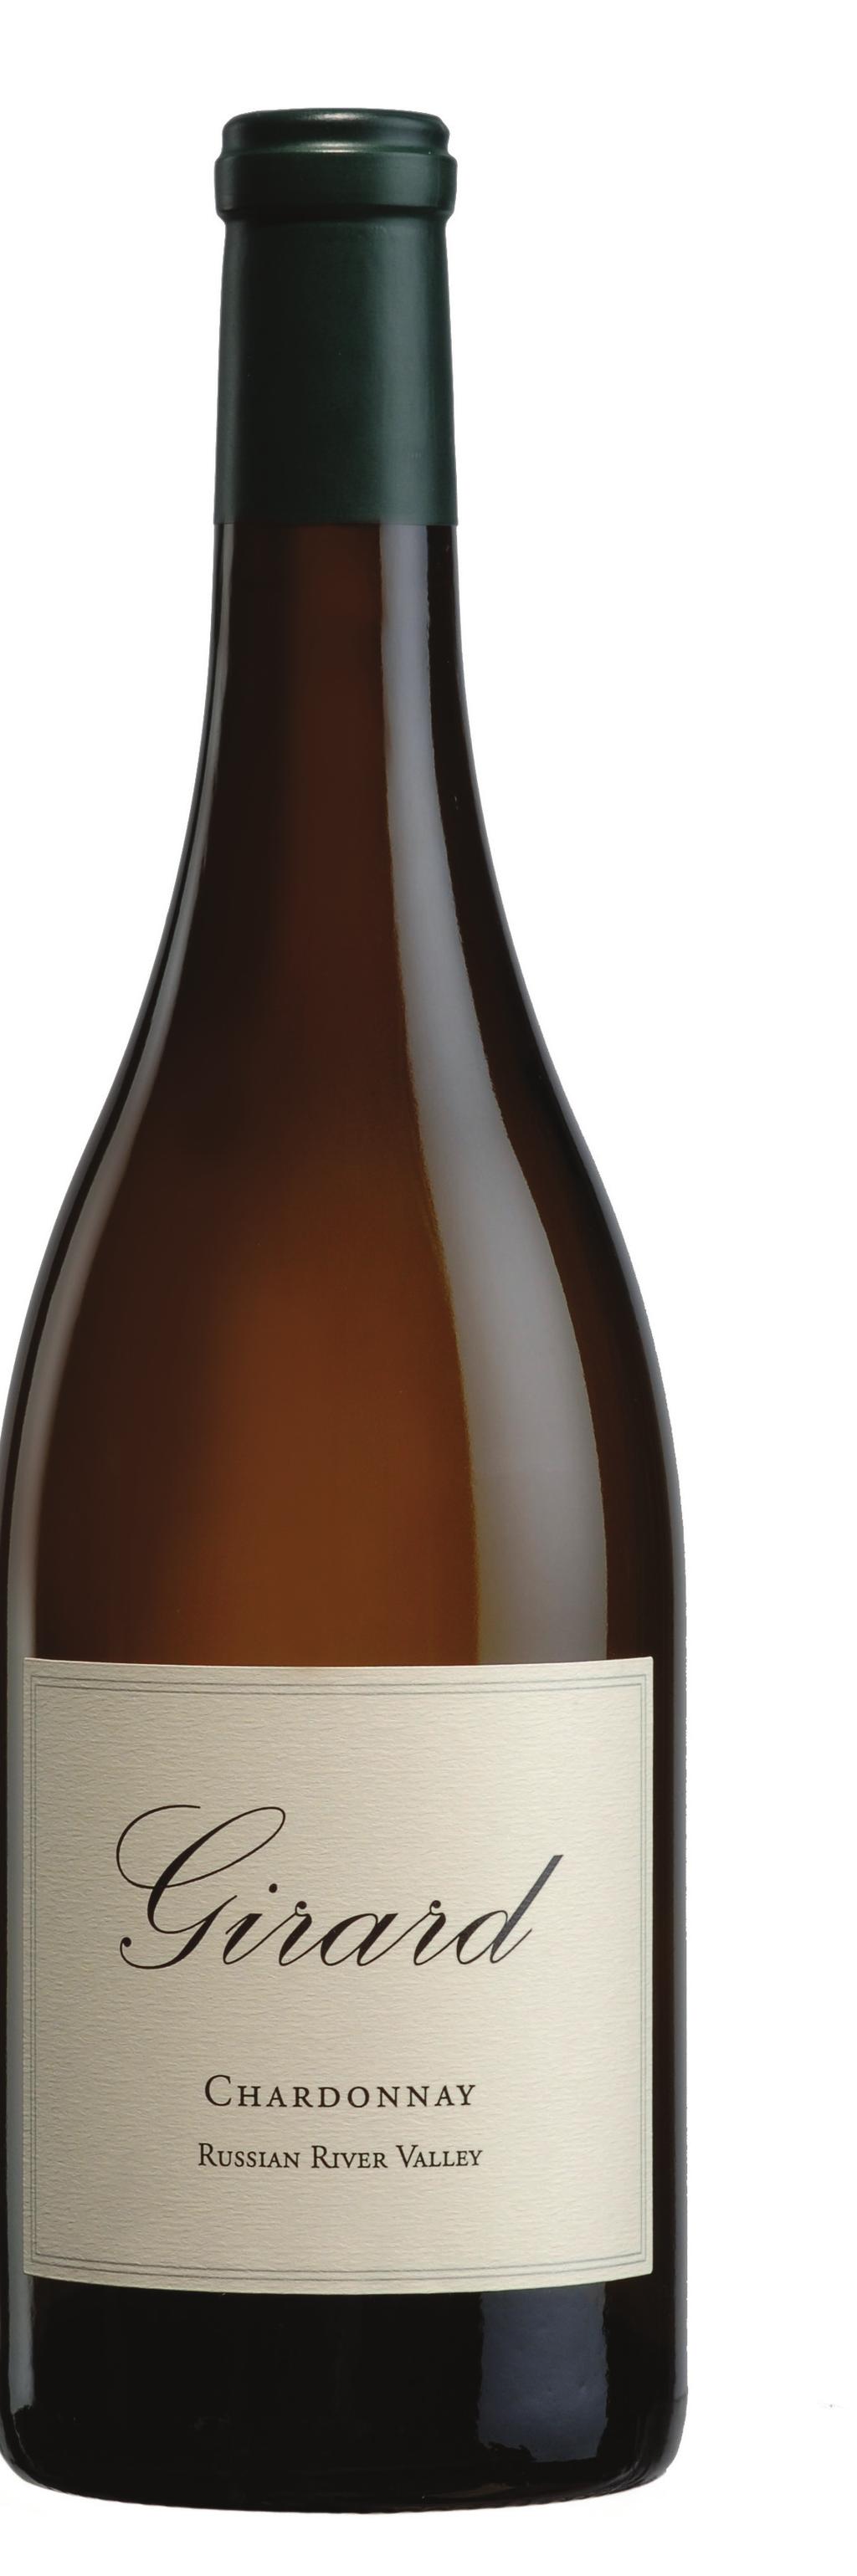 2014 Chardonnay Russian River Valley The nose unfolds with notes of apple, vanilla and freshly grated cinnamon. The palate showcases bright acidity, laced with Mandarin orange and citrus peel.